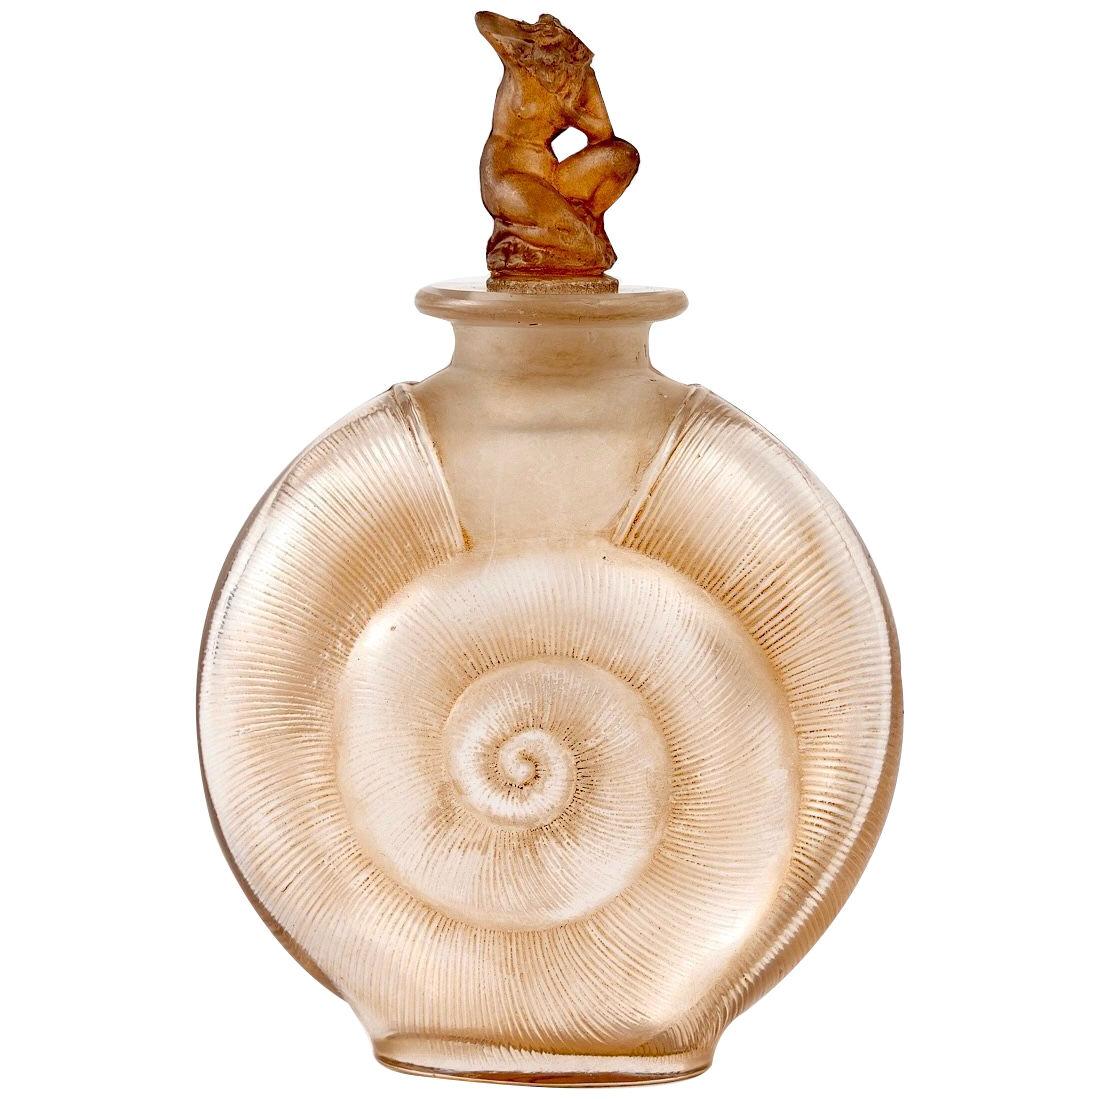 1920 René Lalique - Perfume Bottle Amphitrite Frosted Glass With Sepia Patina